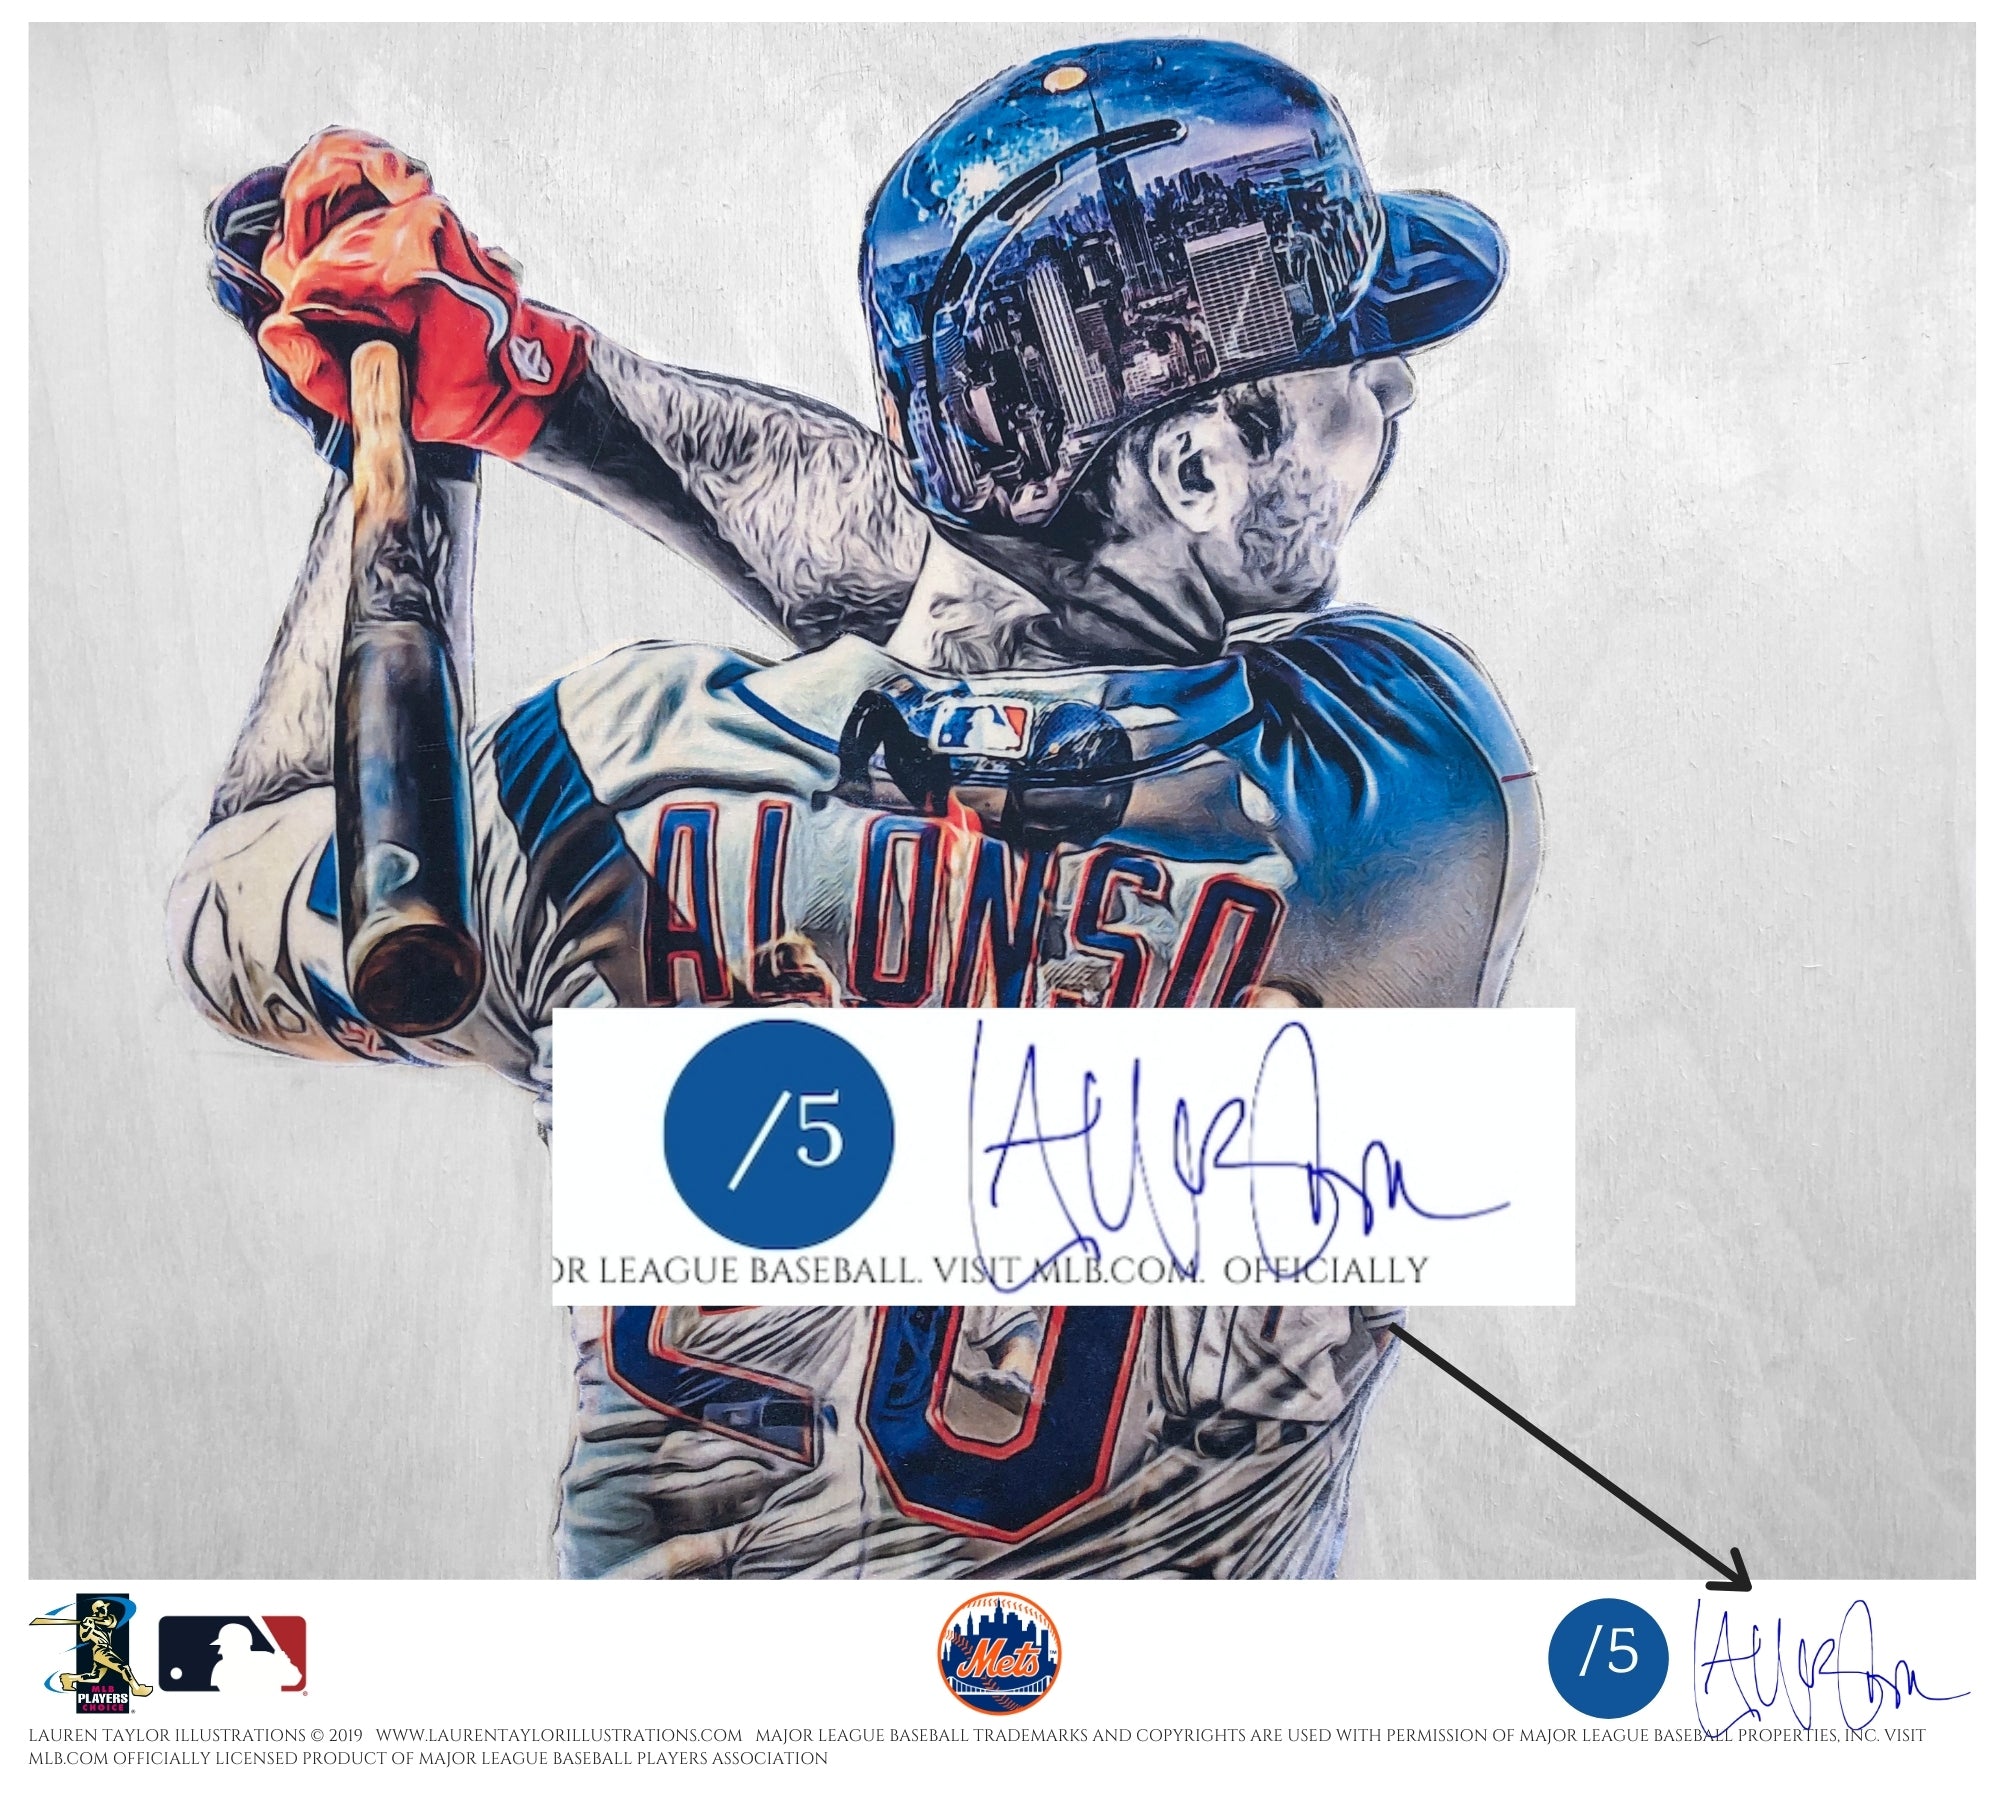 Polar Bear (Pete Alonso) New York Mets - Officially Licensed MLB Print -  BLUE ARTIST SIGNATURE Limited Release /5